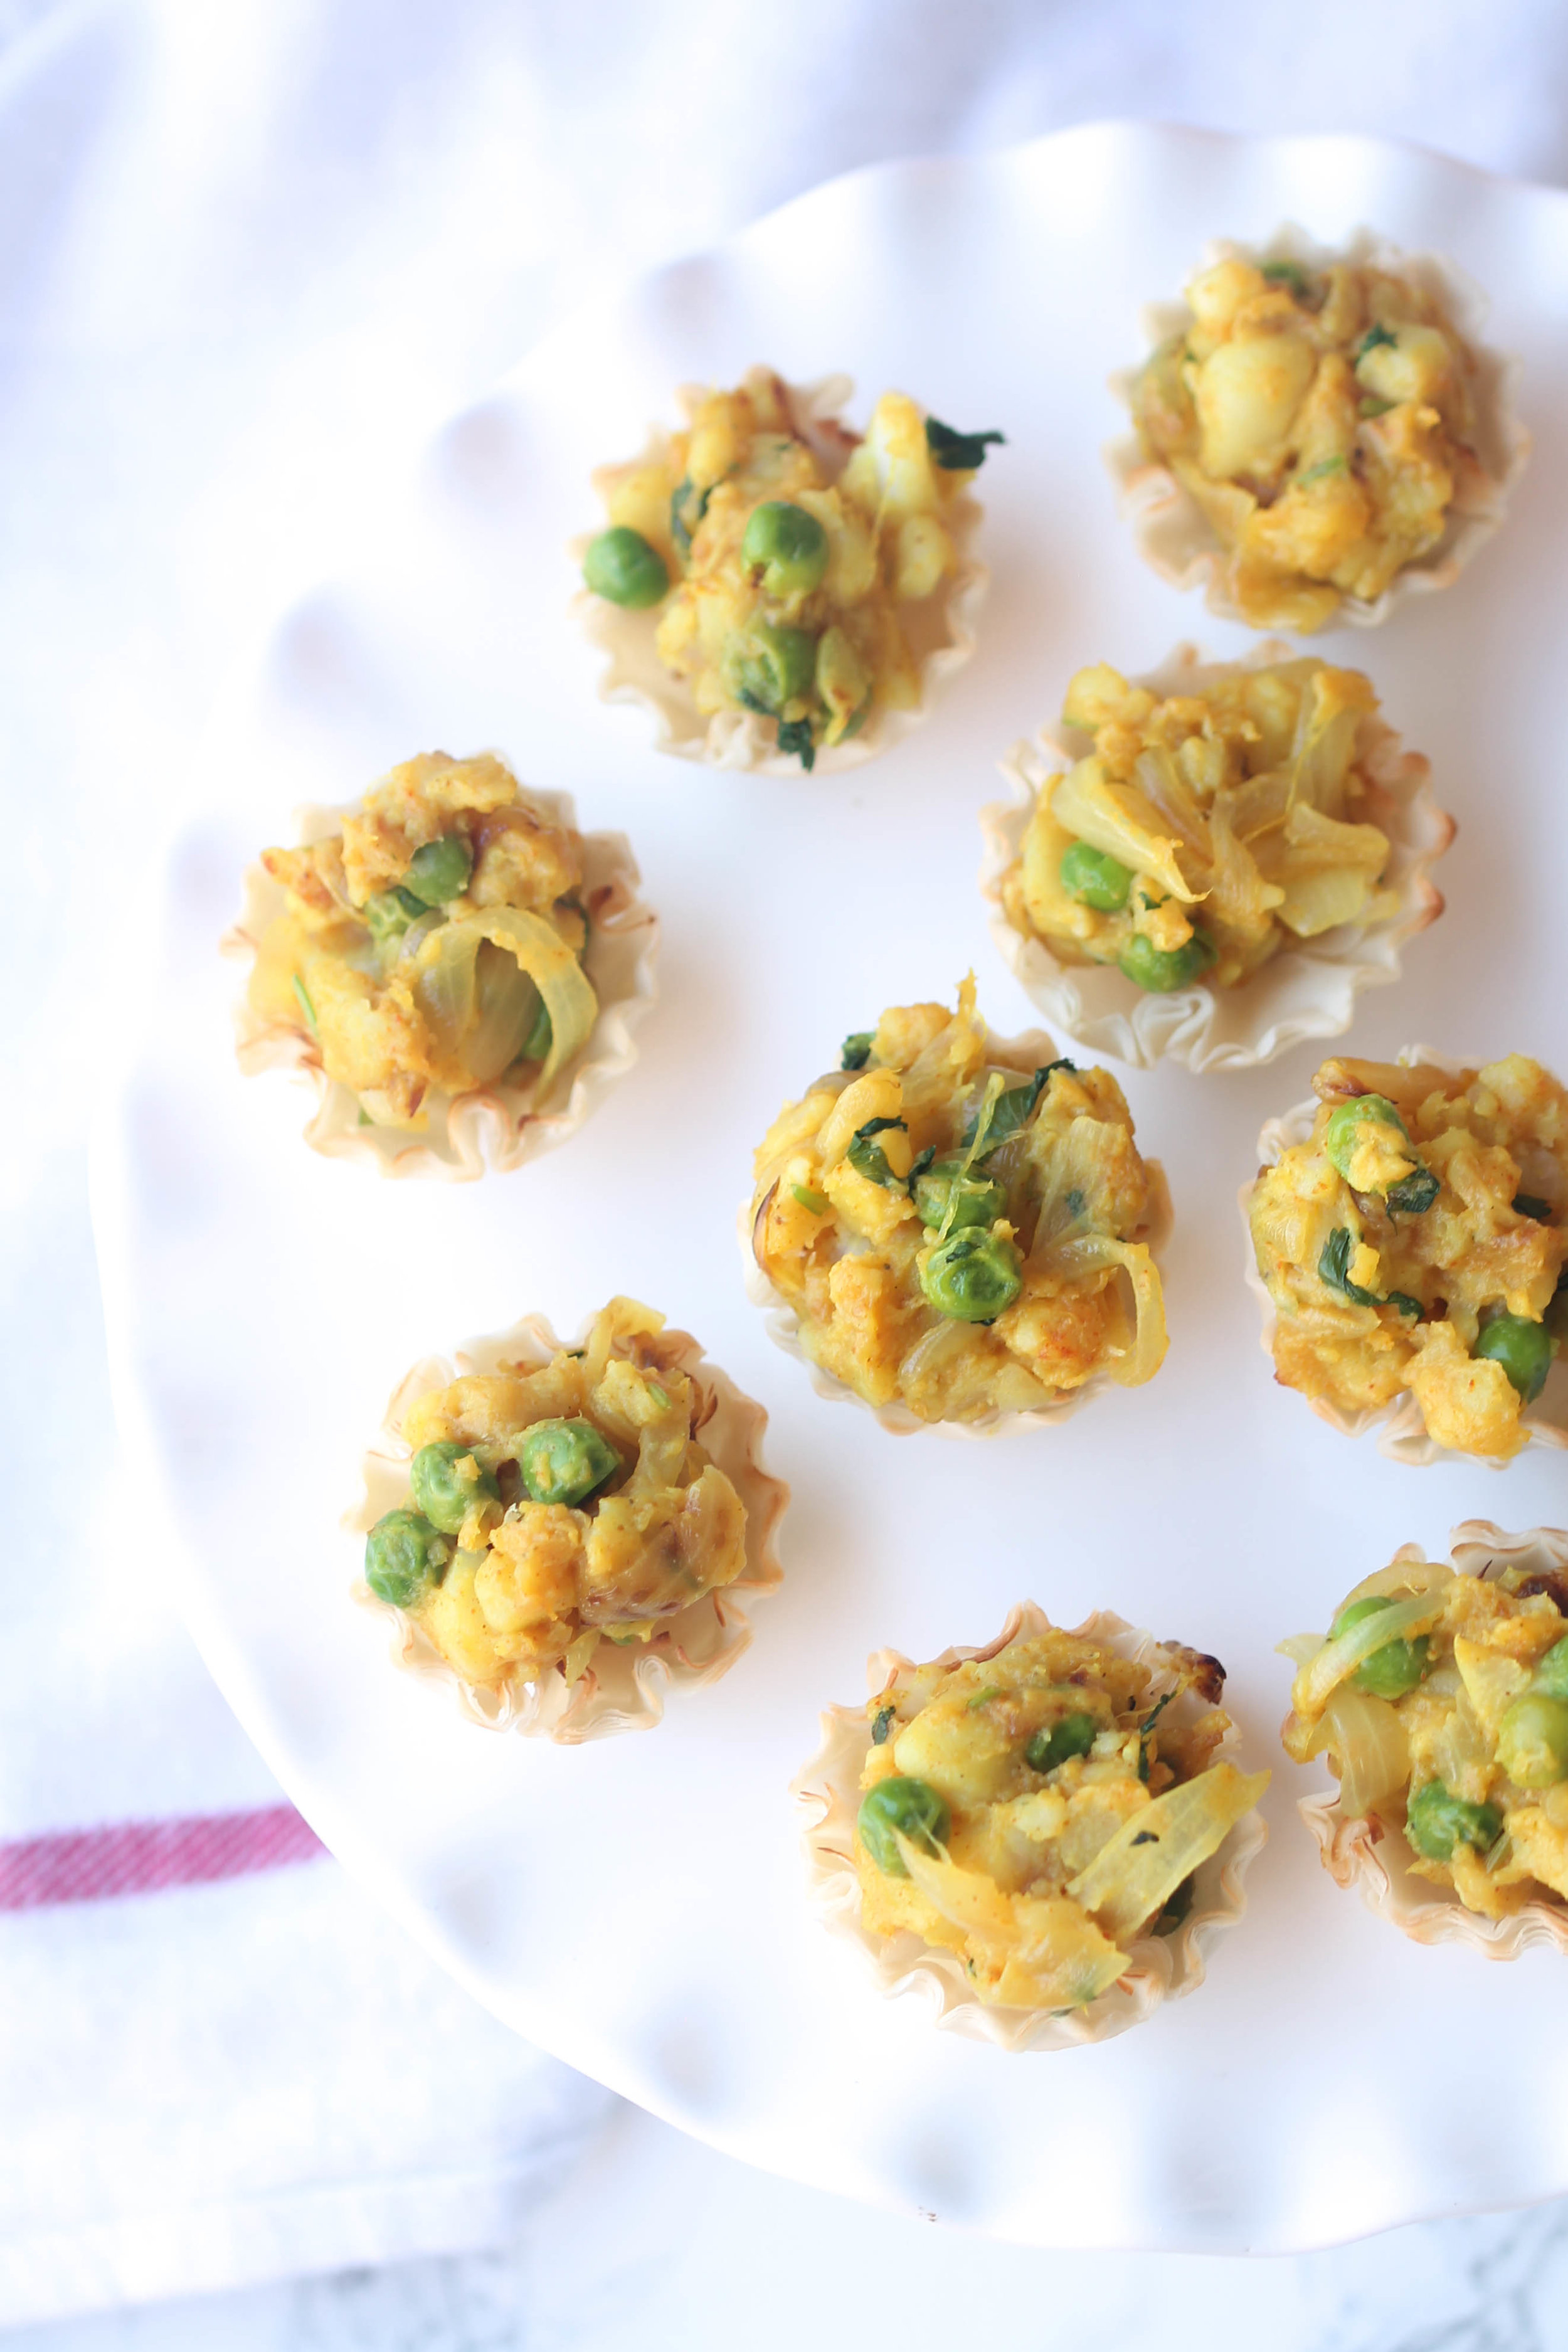 Samosa Bites - Vegan, Healthier version of Samosas for parties and get togethers!